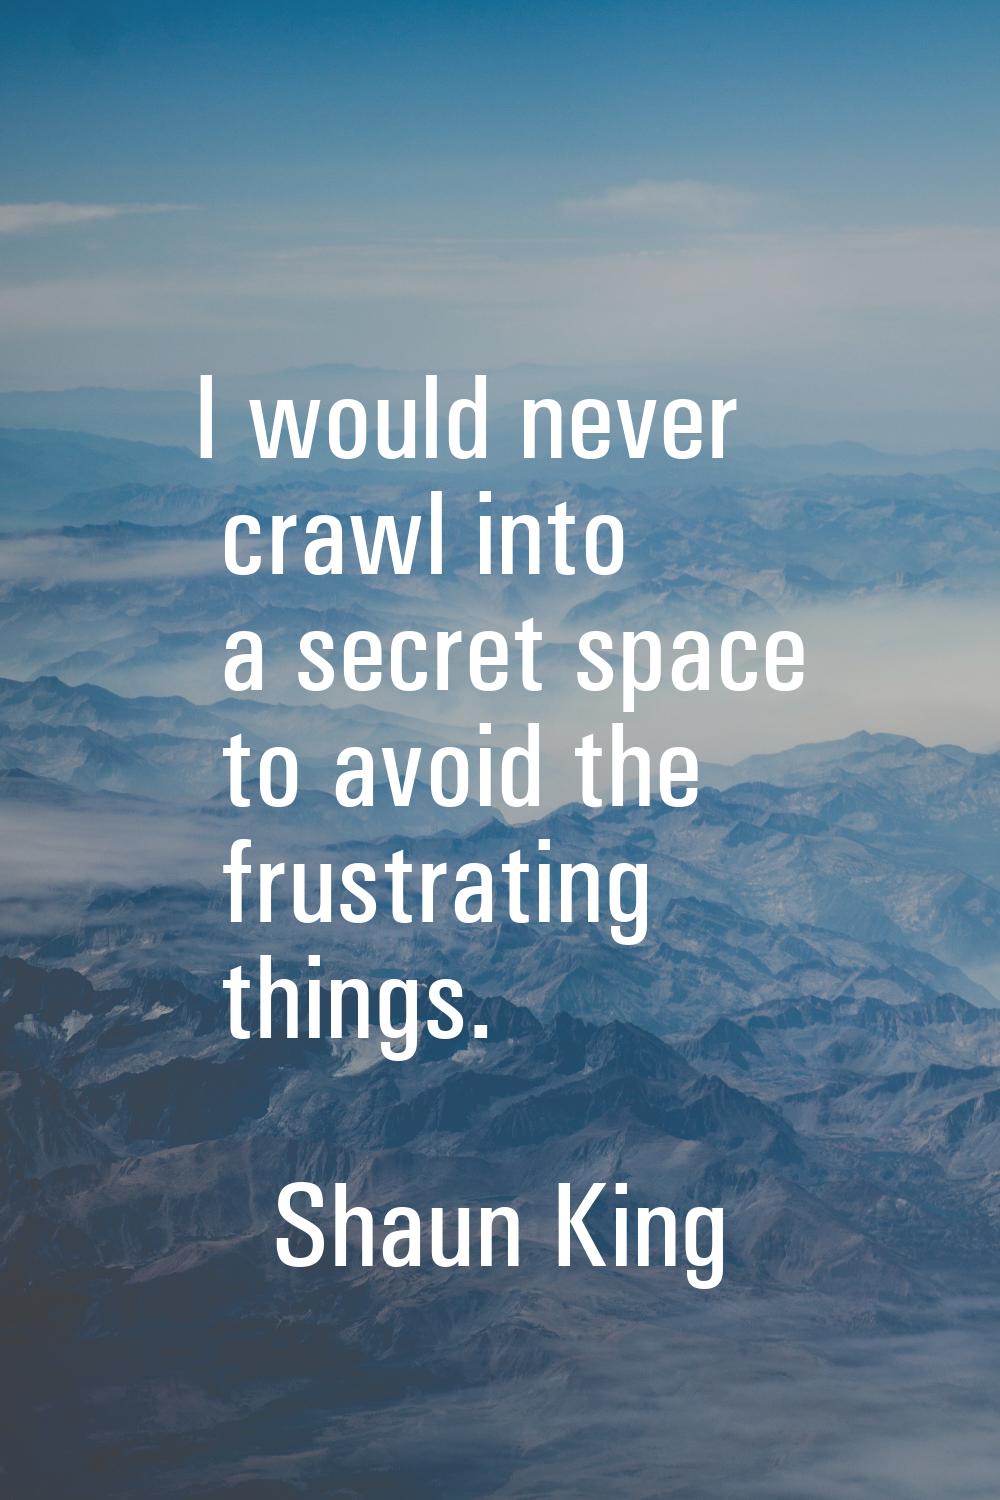 I would never crawl into a secret space to avoid the frustrating things.